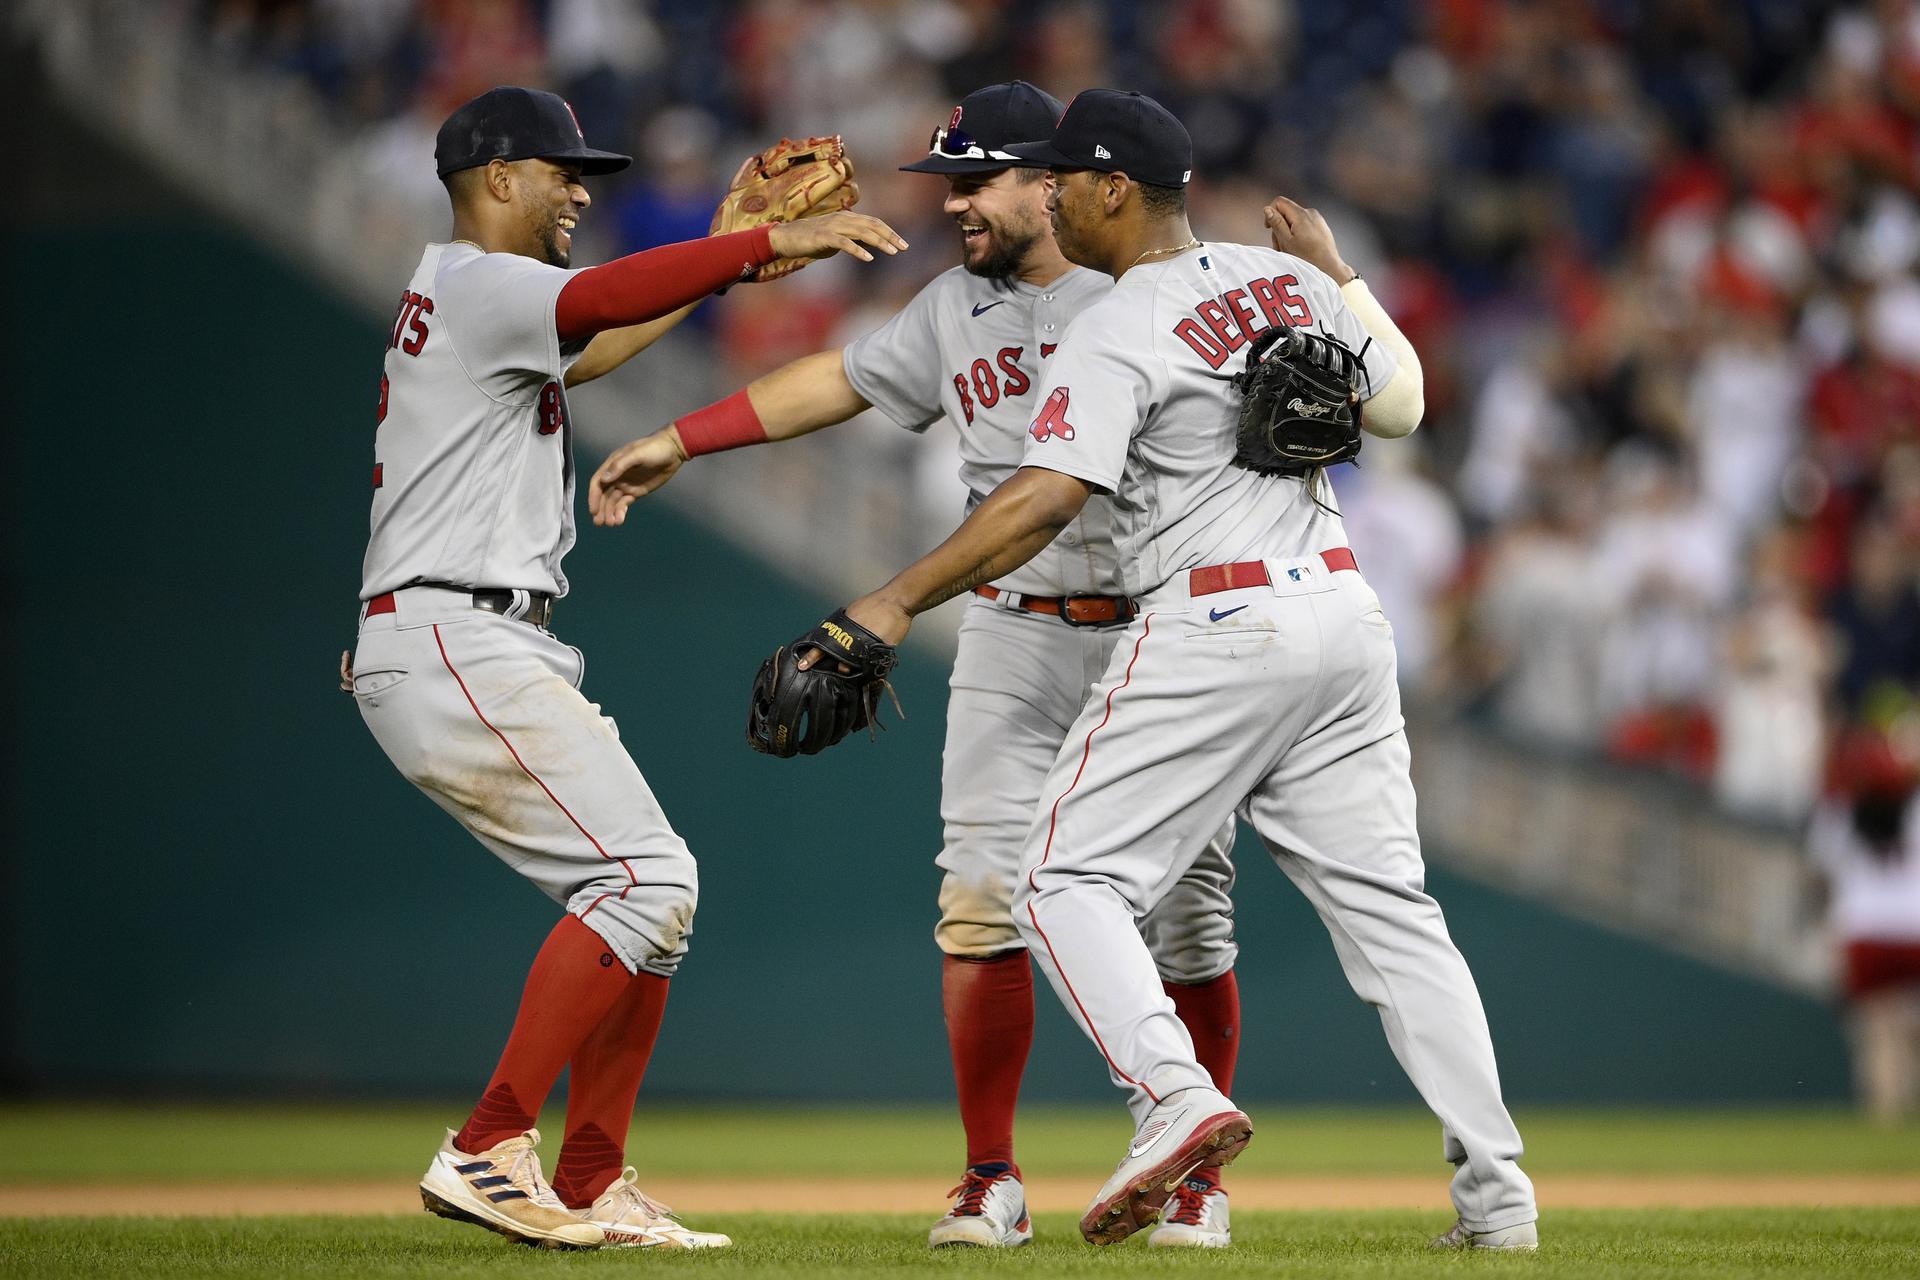 Rafael Devers mashes two homers as Red Sox greet Xander Bogaerts